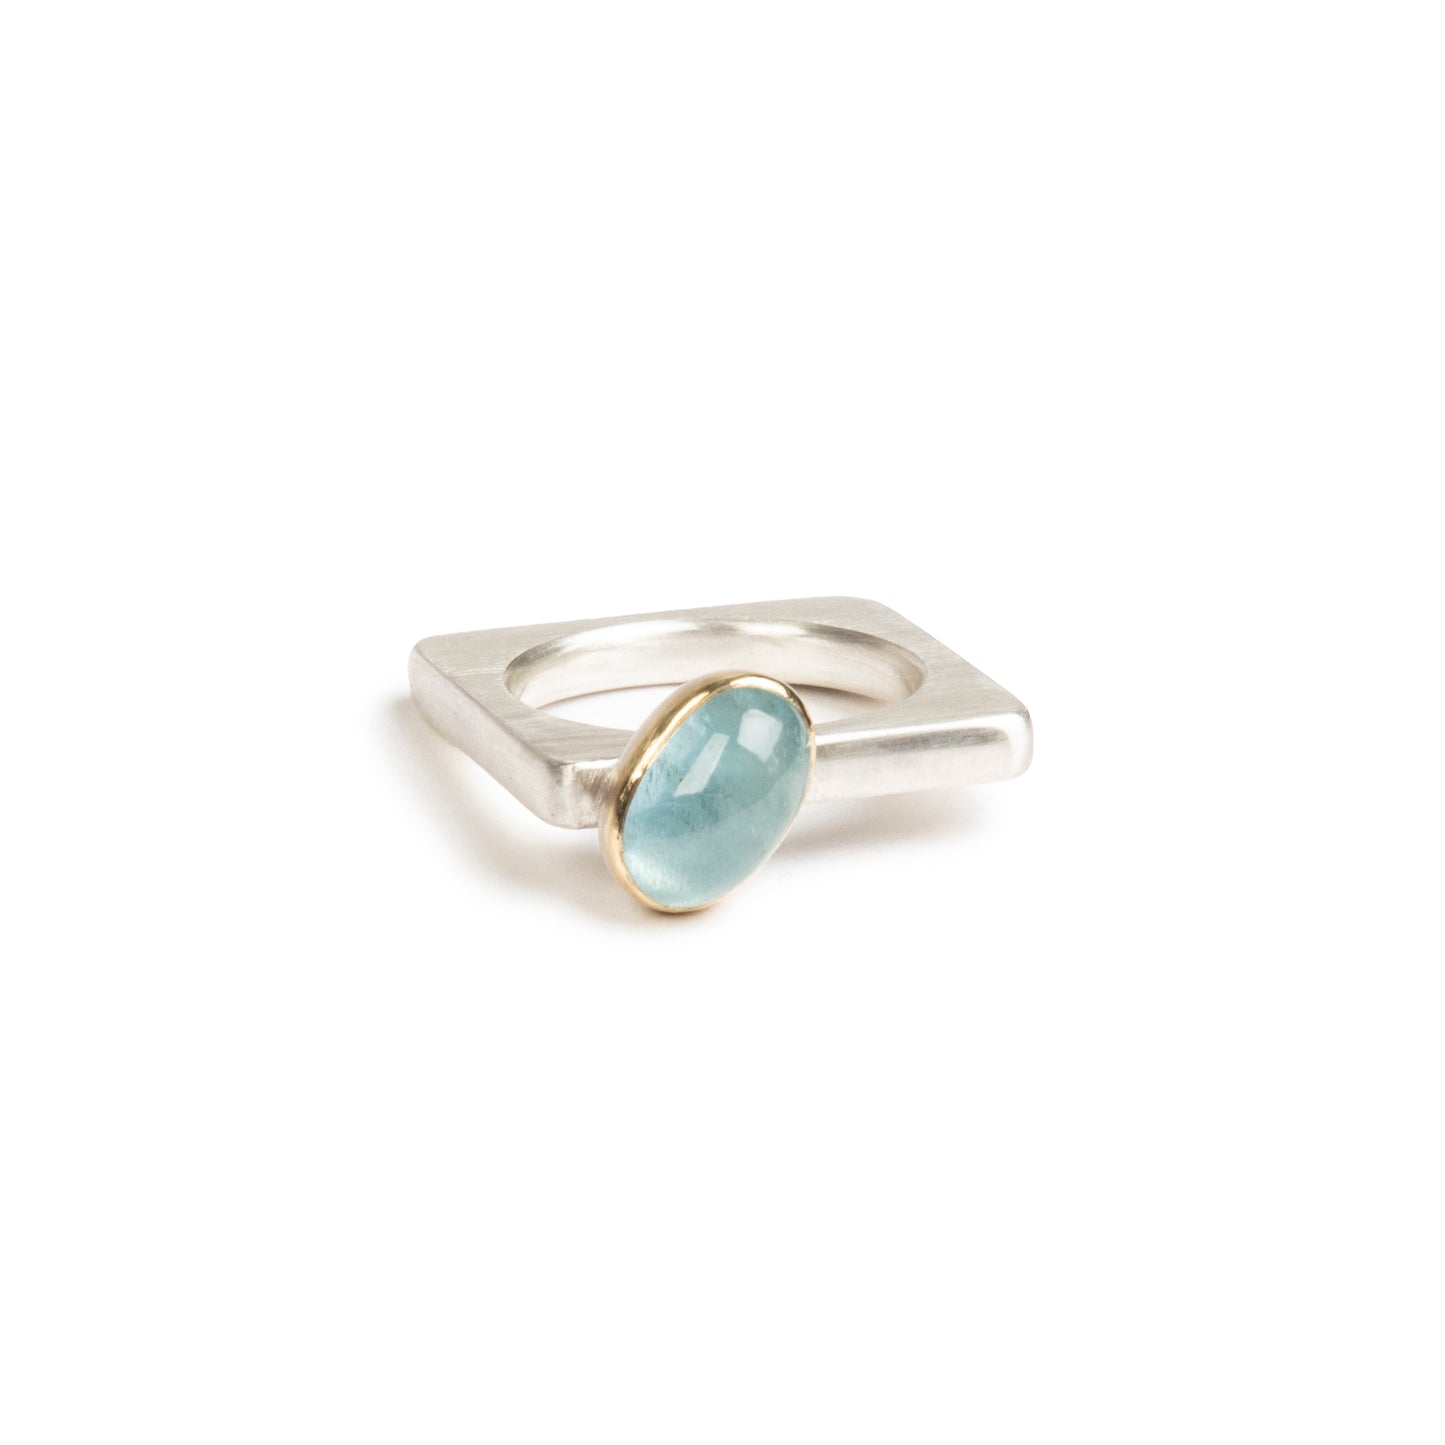 Thick silver ring with oval aquamarine #barbaraspencejewellery